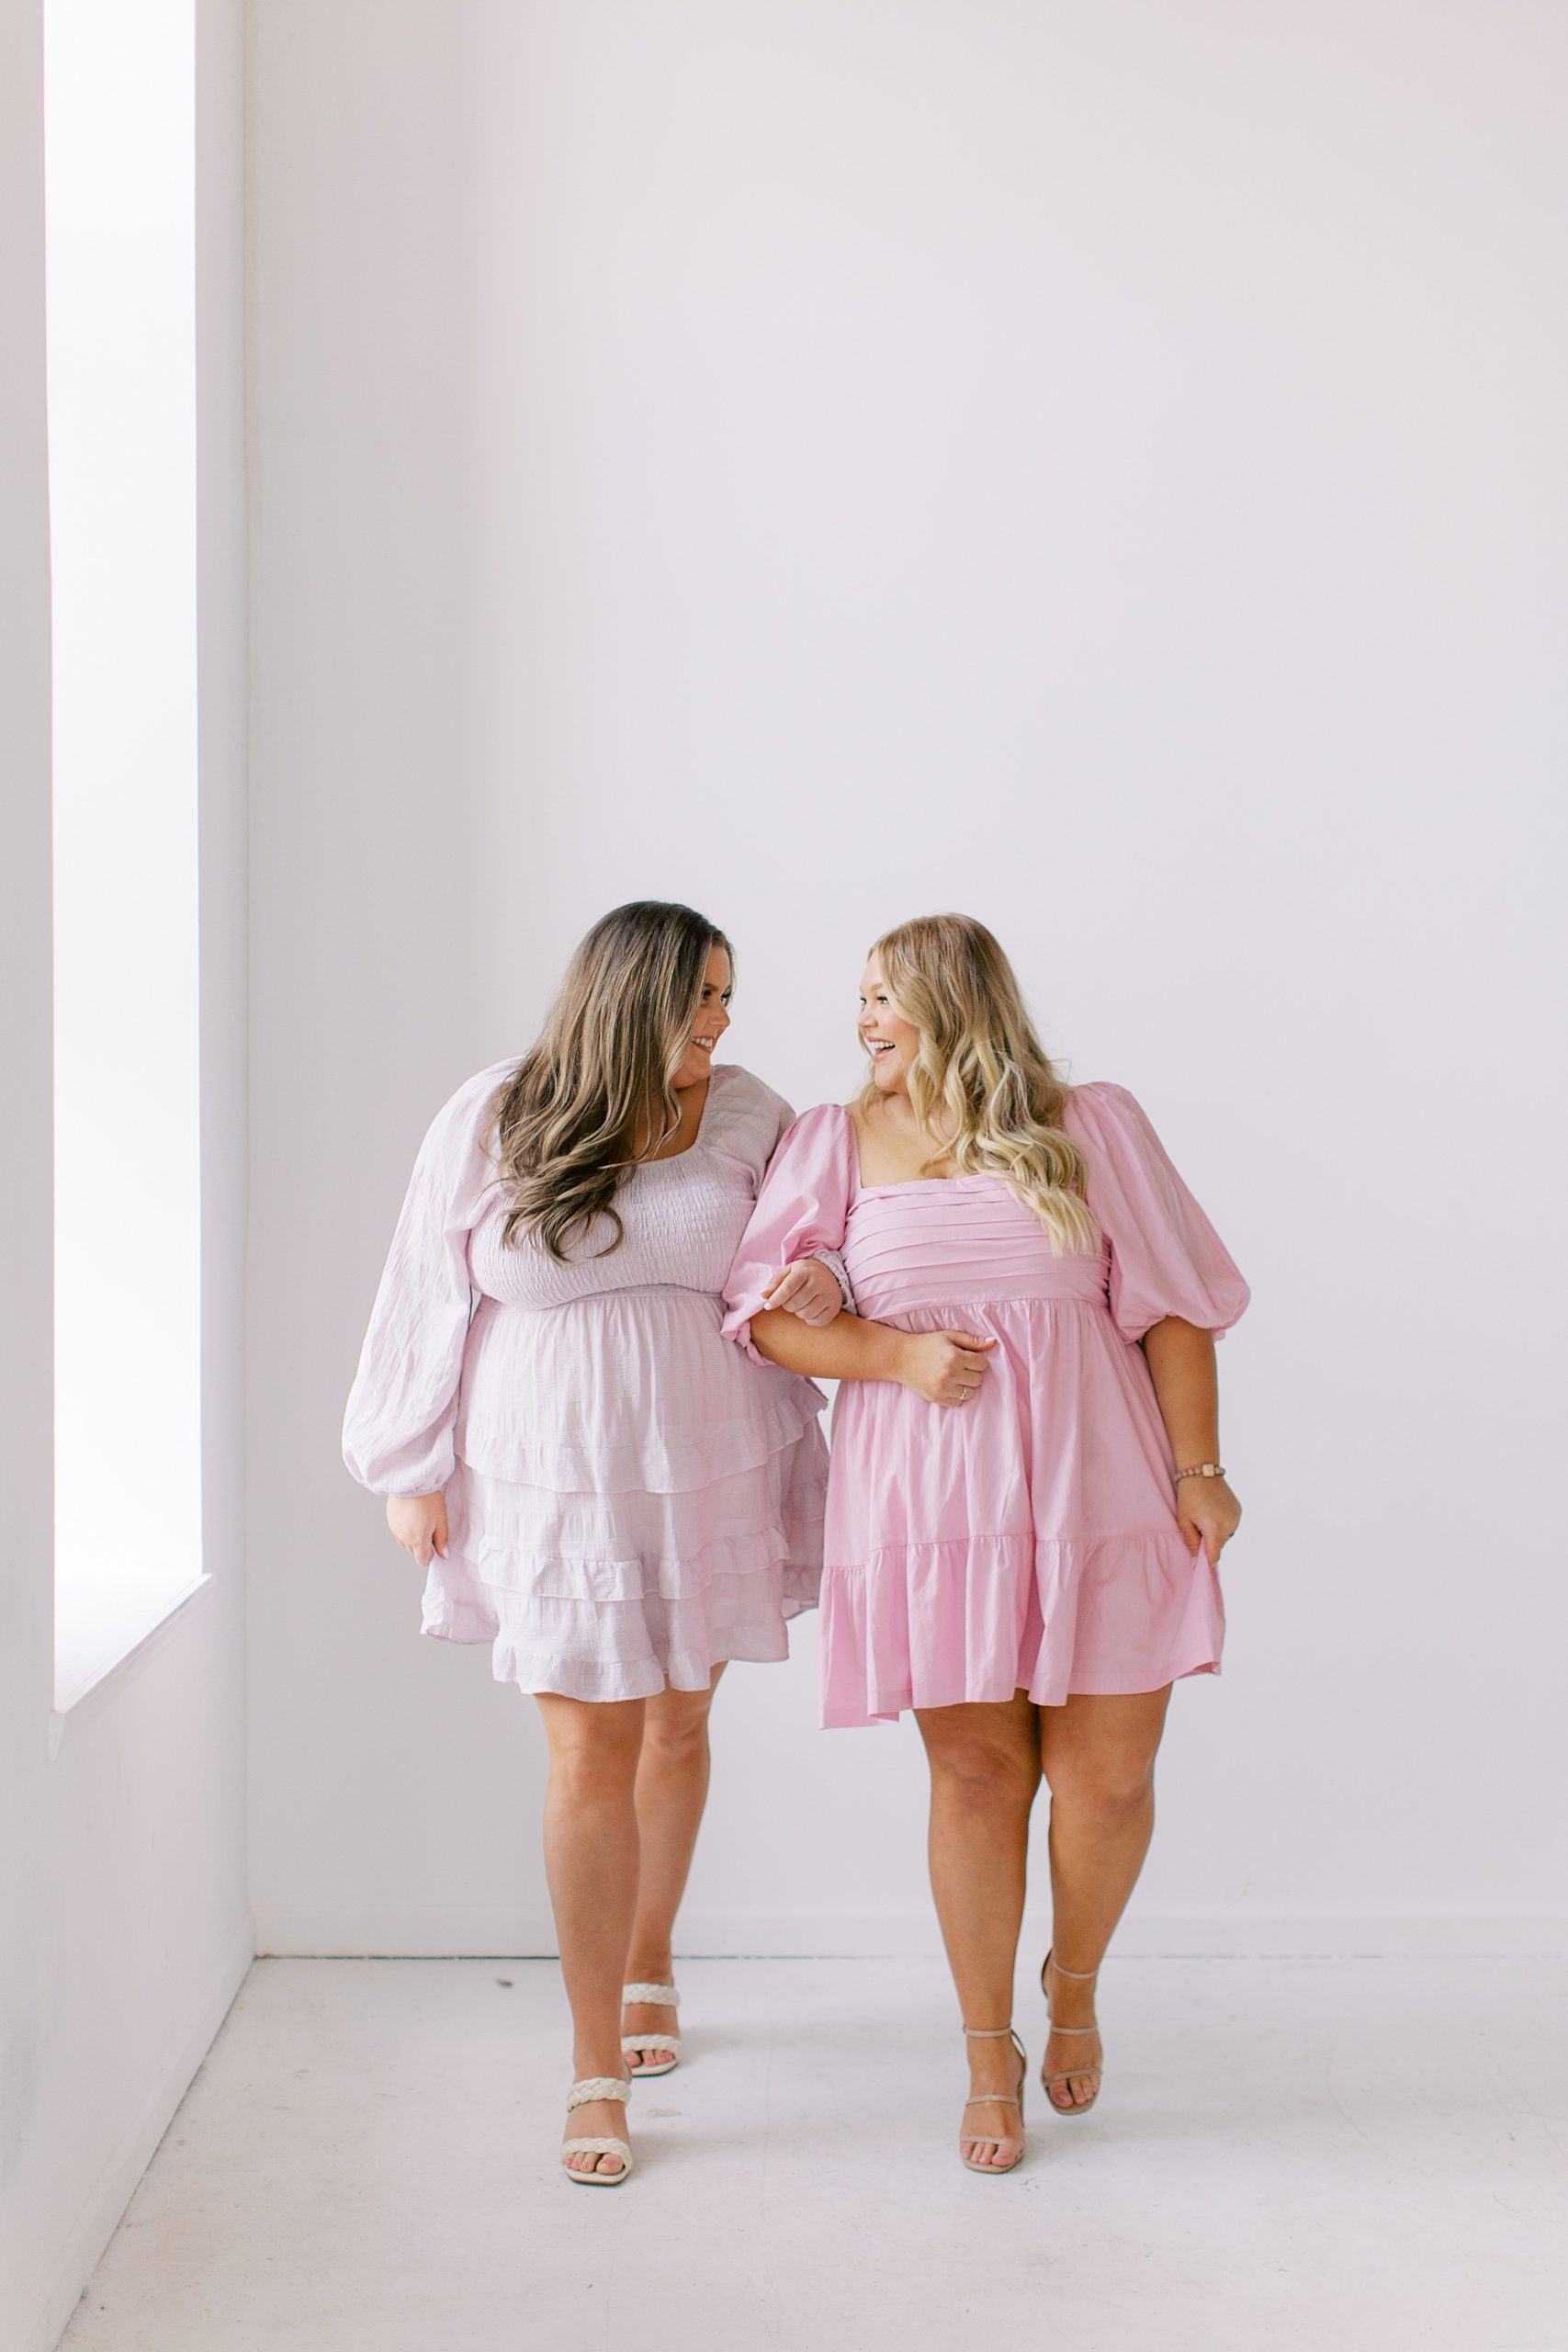 women link arms in pink dresses and walk in white studio